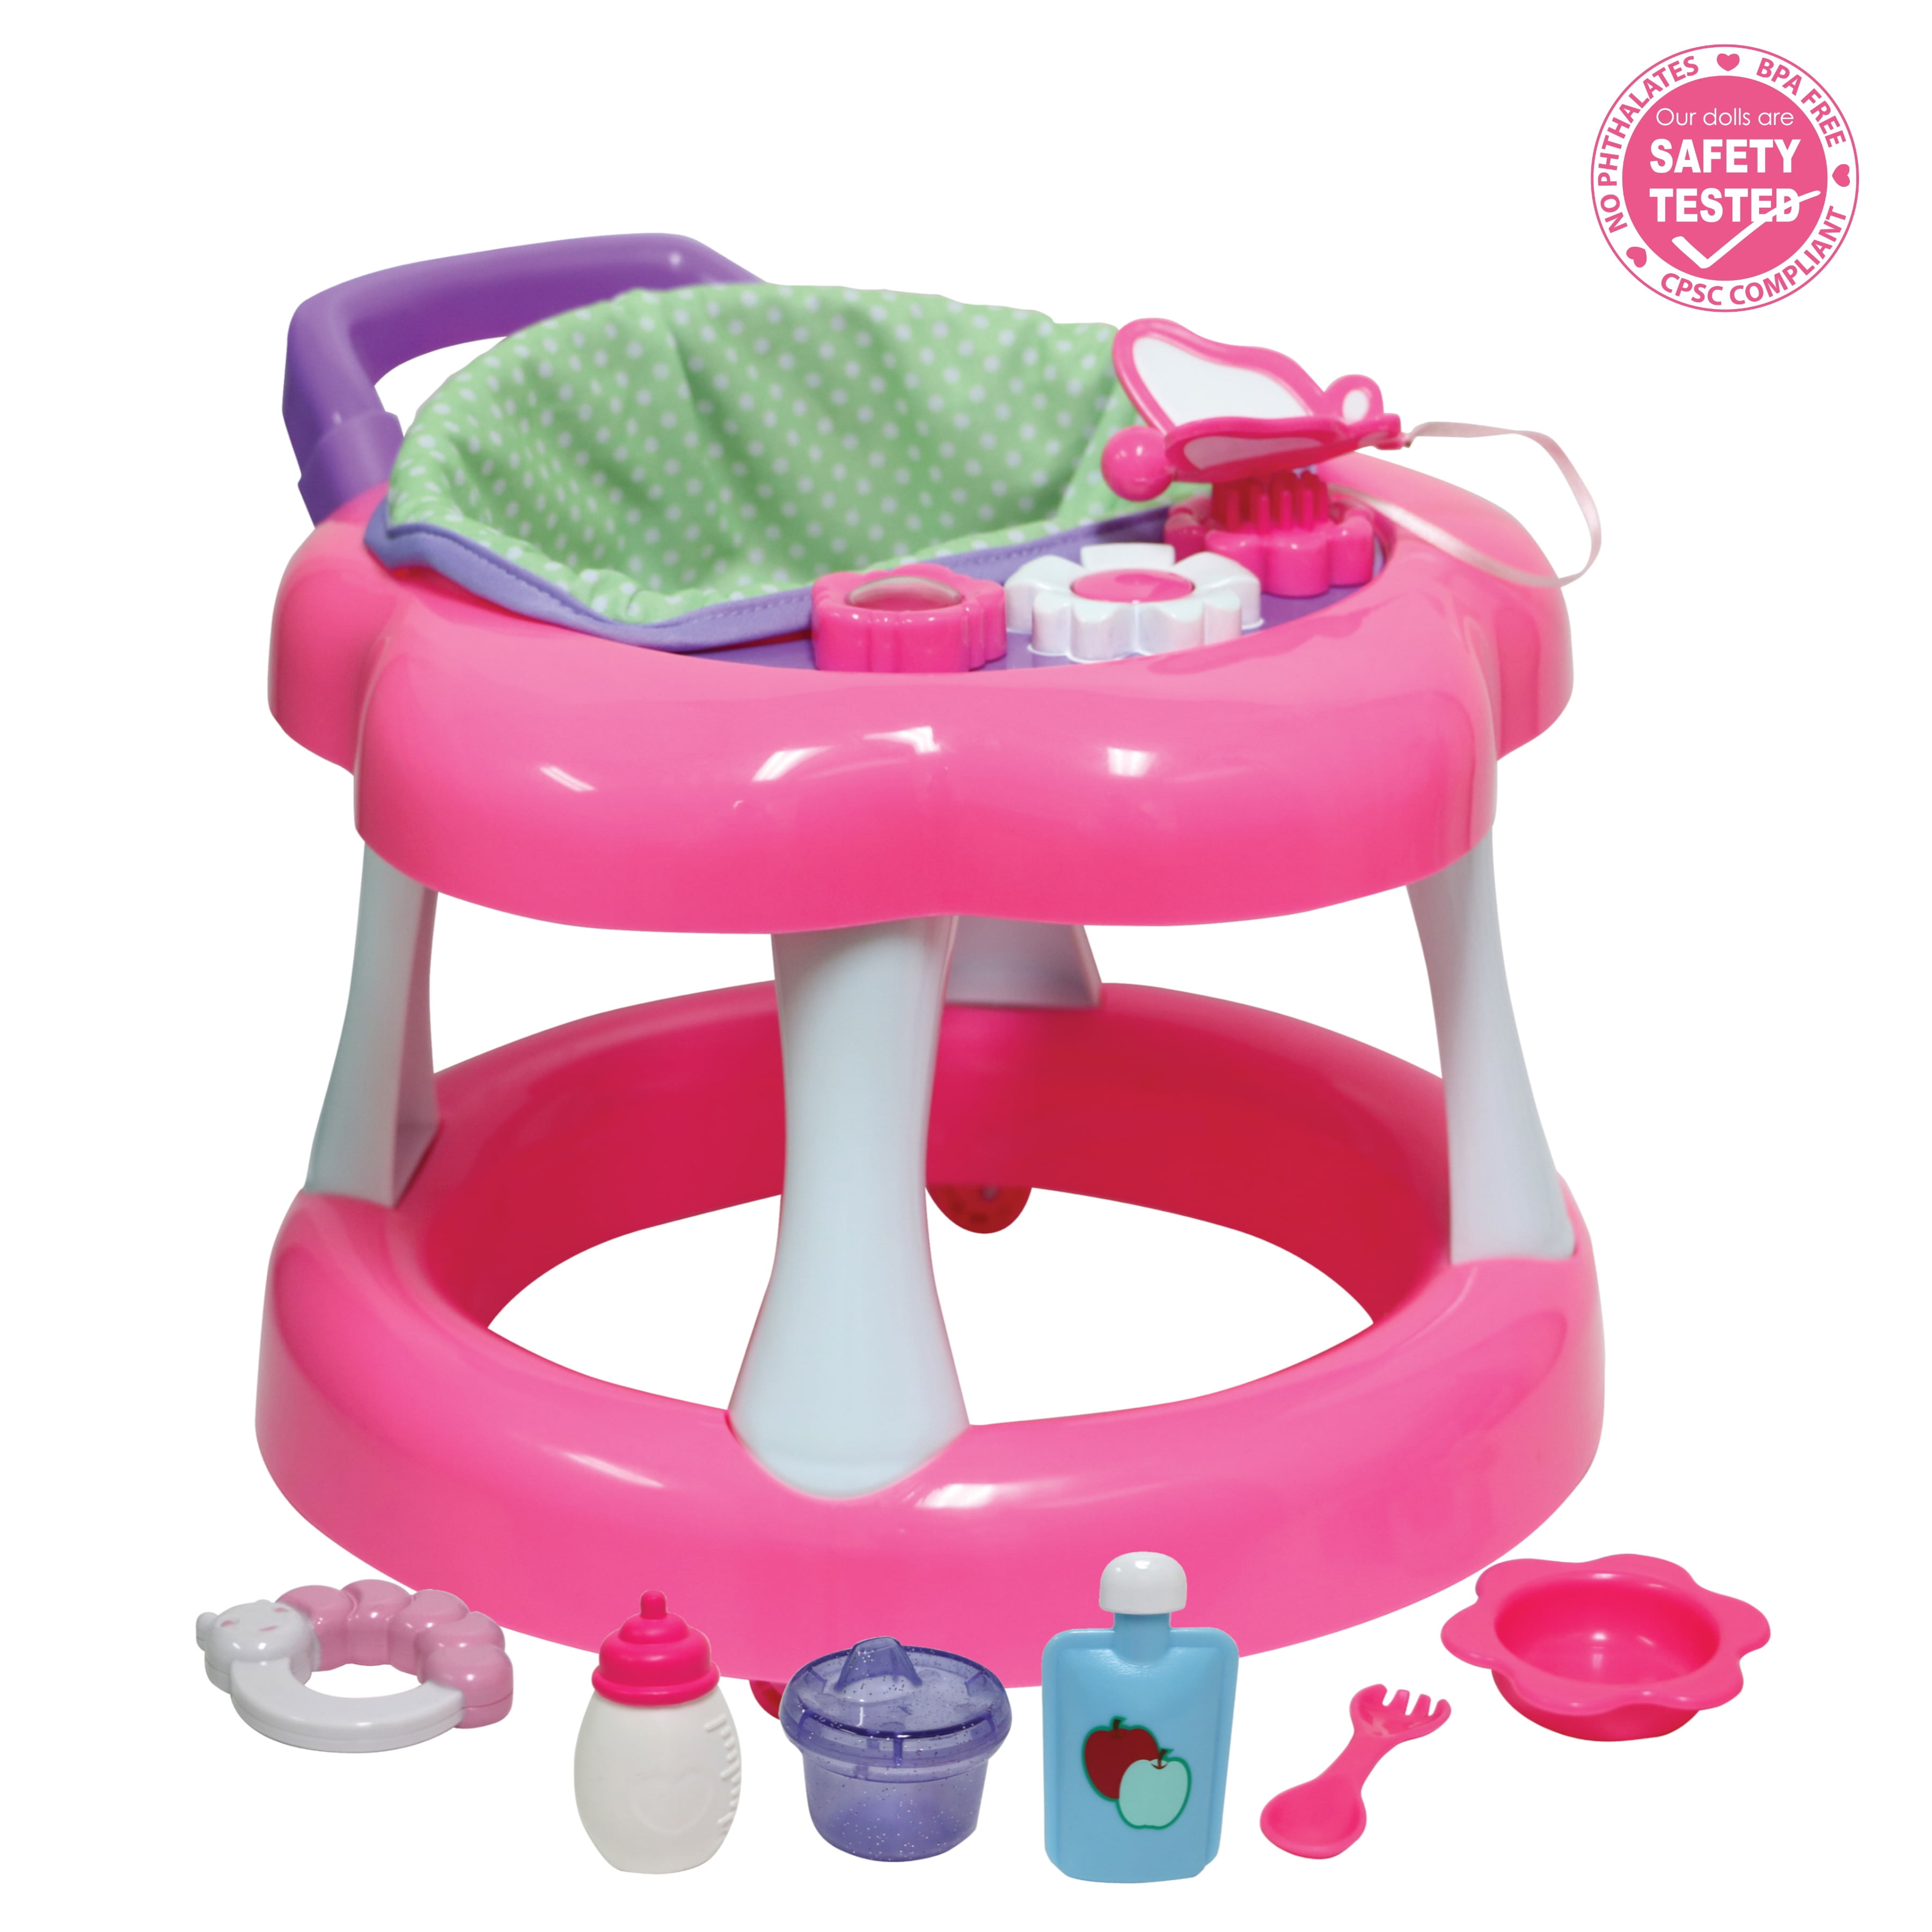 Jc Toys For Keeps Baby Doll Walker With Play Accessory For Dolls Up To 16". 